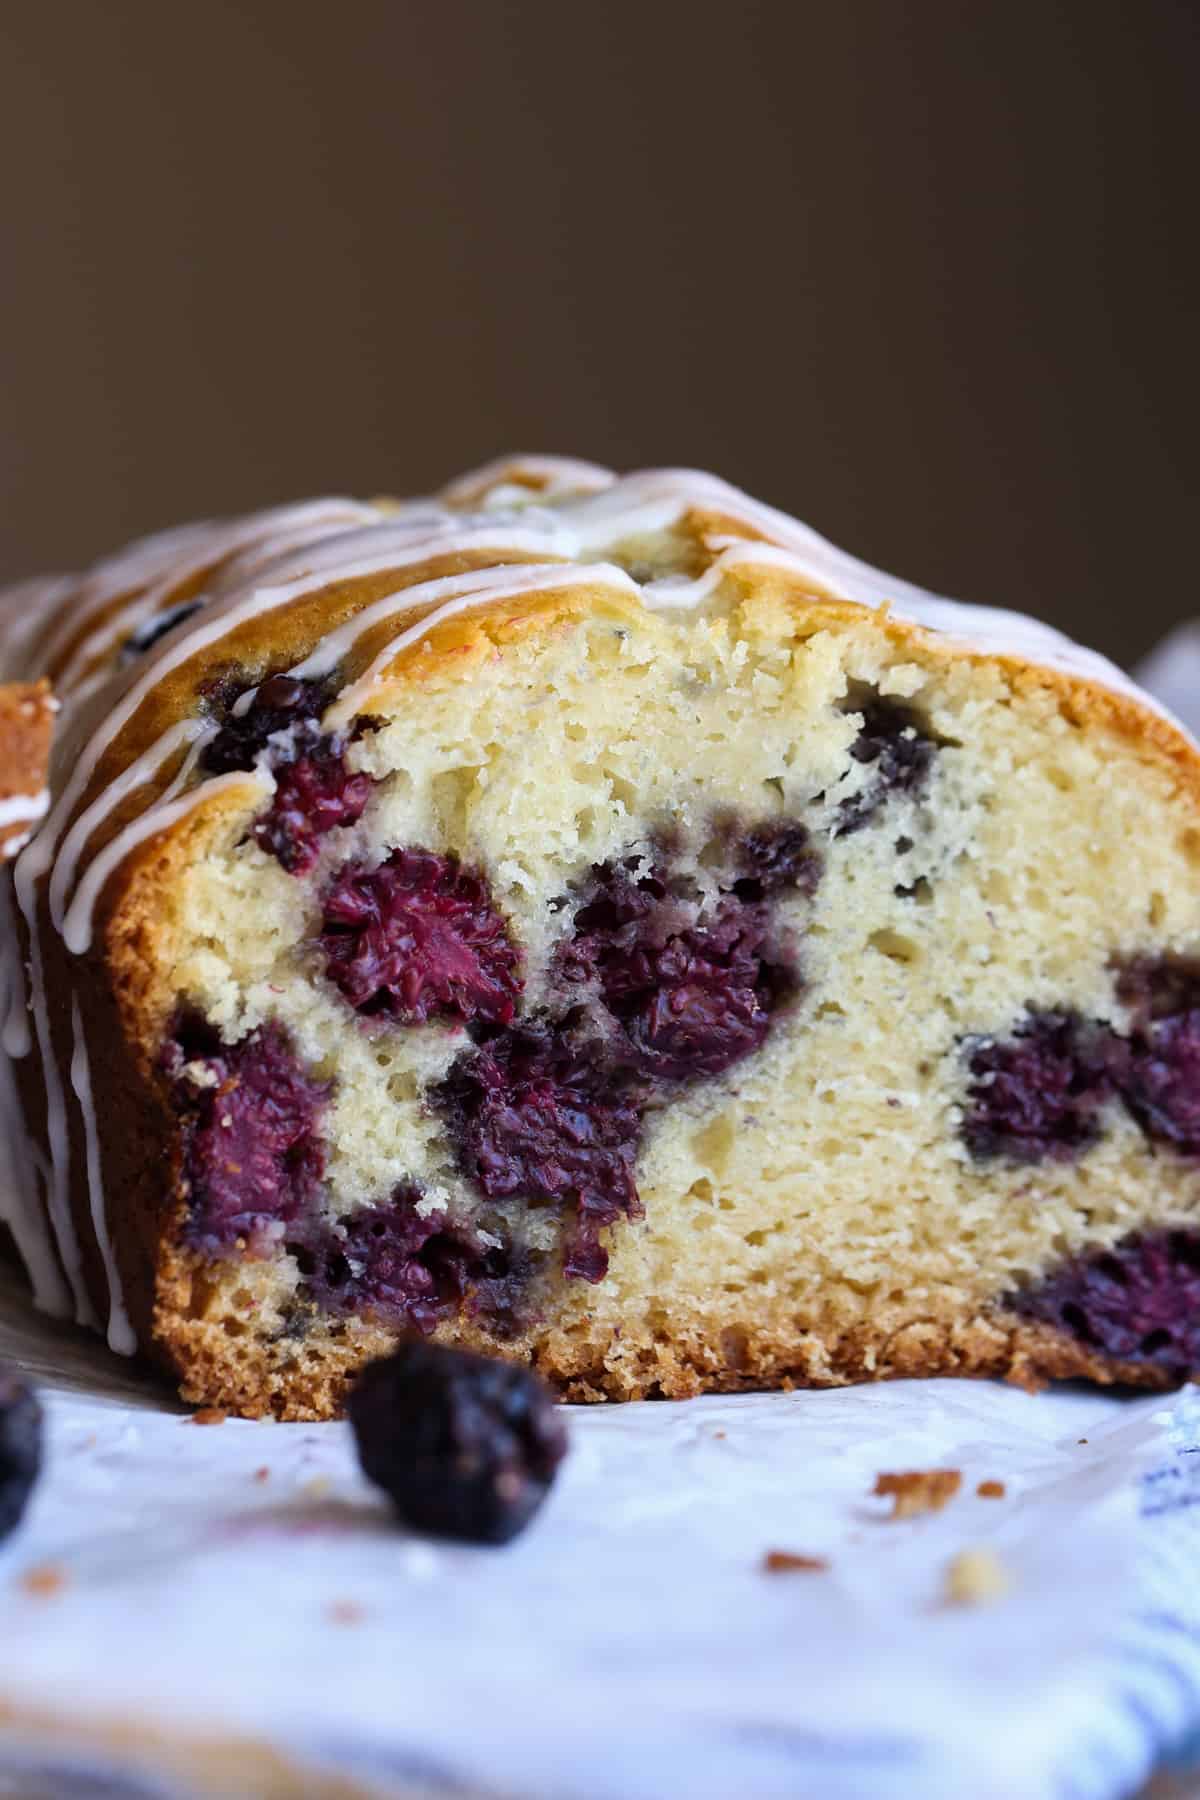 A loaf of blackberry bread sliced showing the inside of the loaf with fresh blackberries